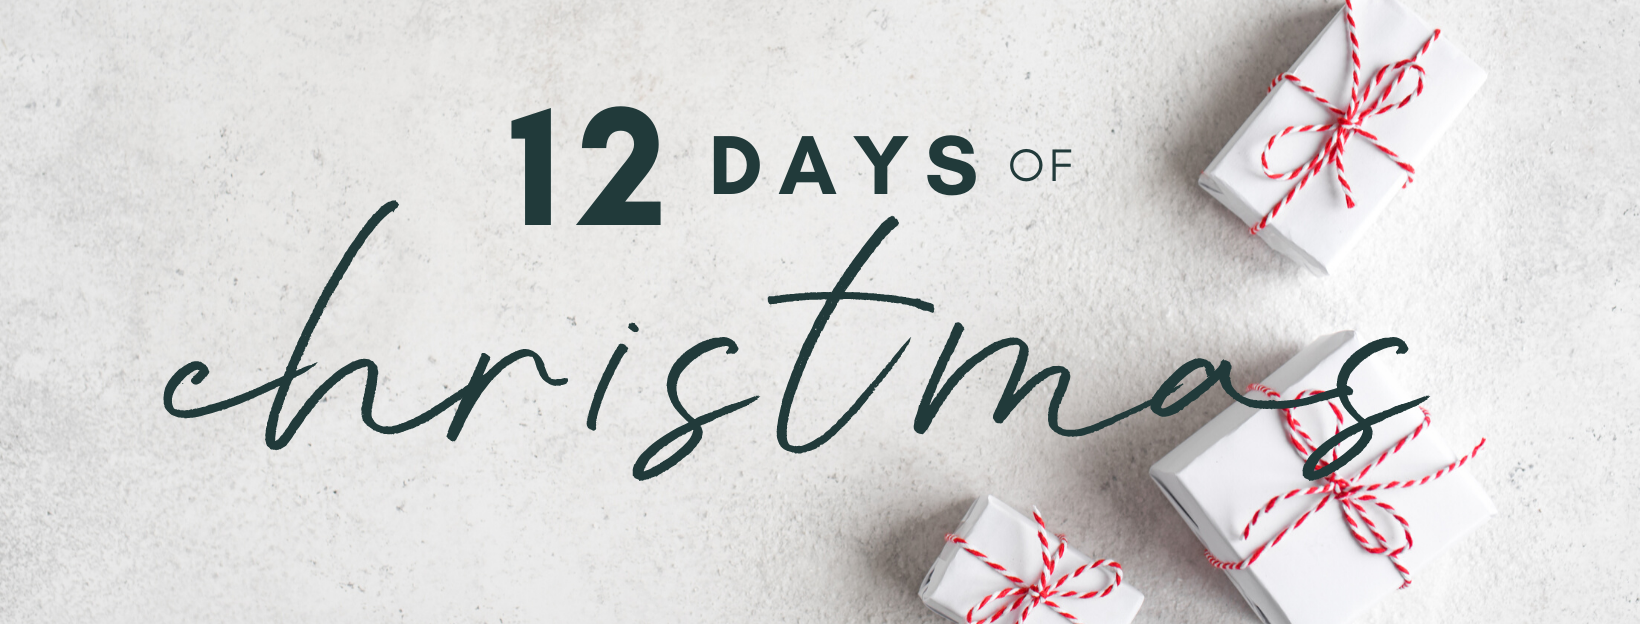 the 12 days of christmas